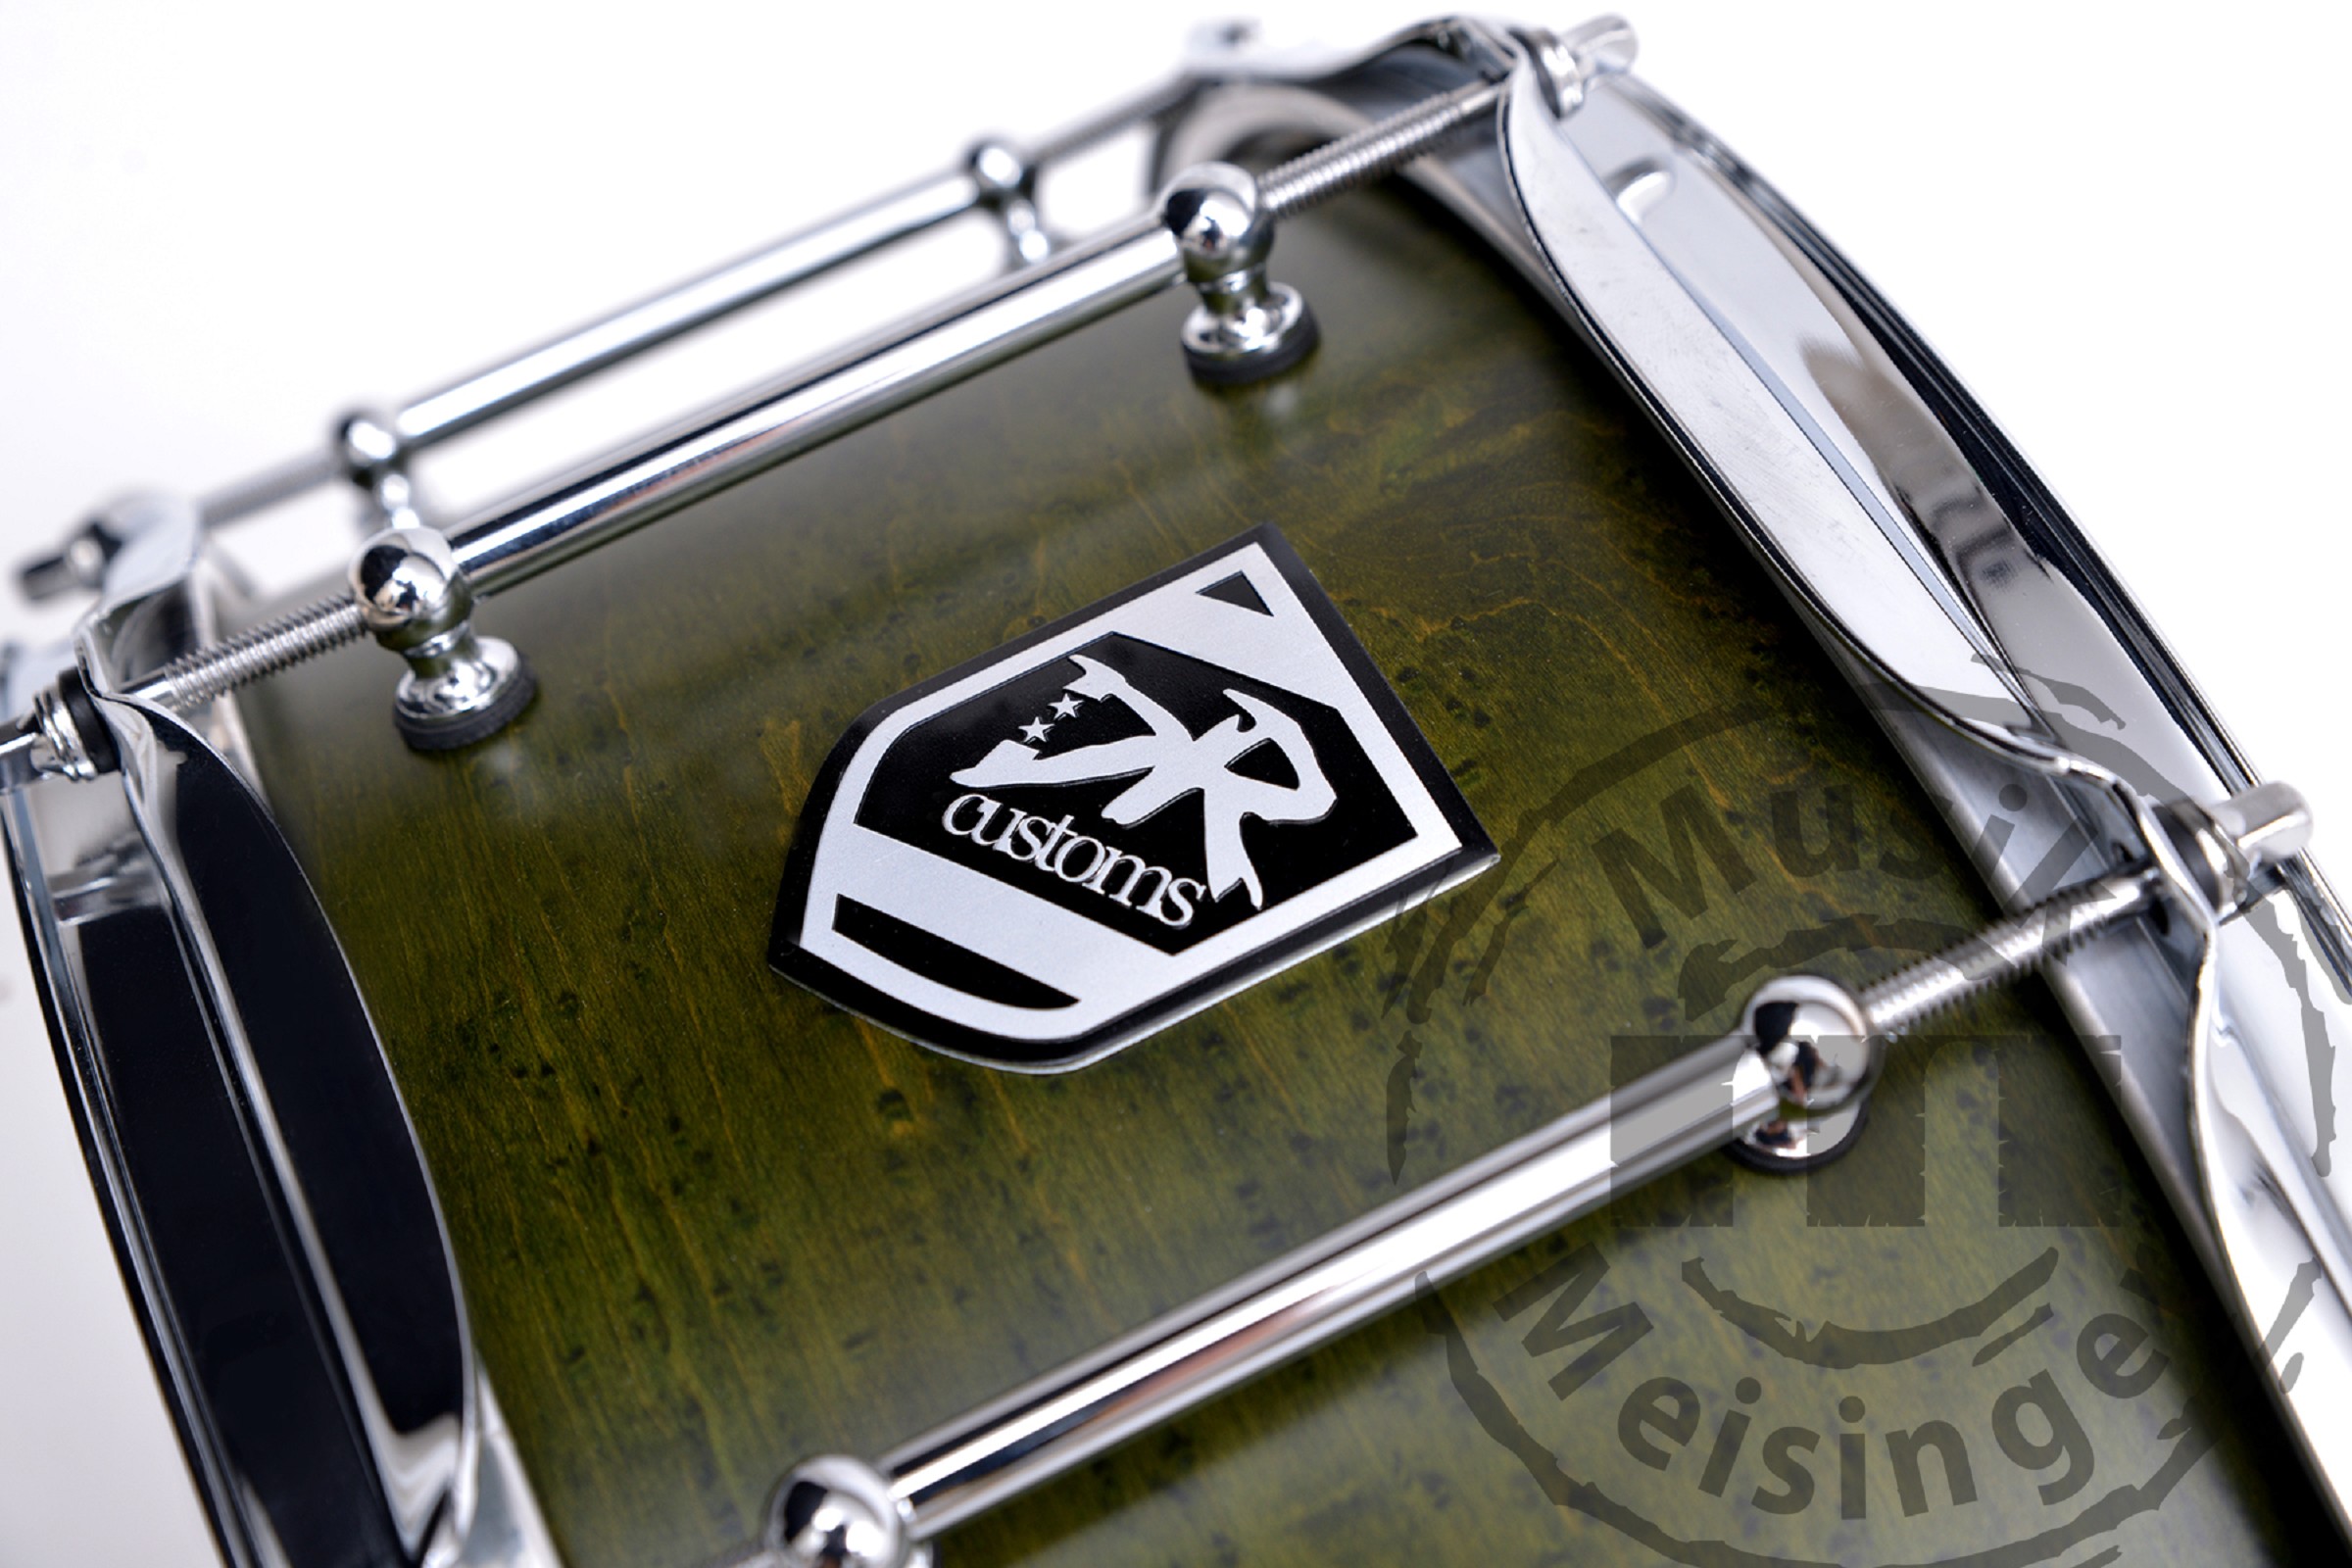 DR Customs Snare 14x7 Green Satin Maple Snare